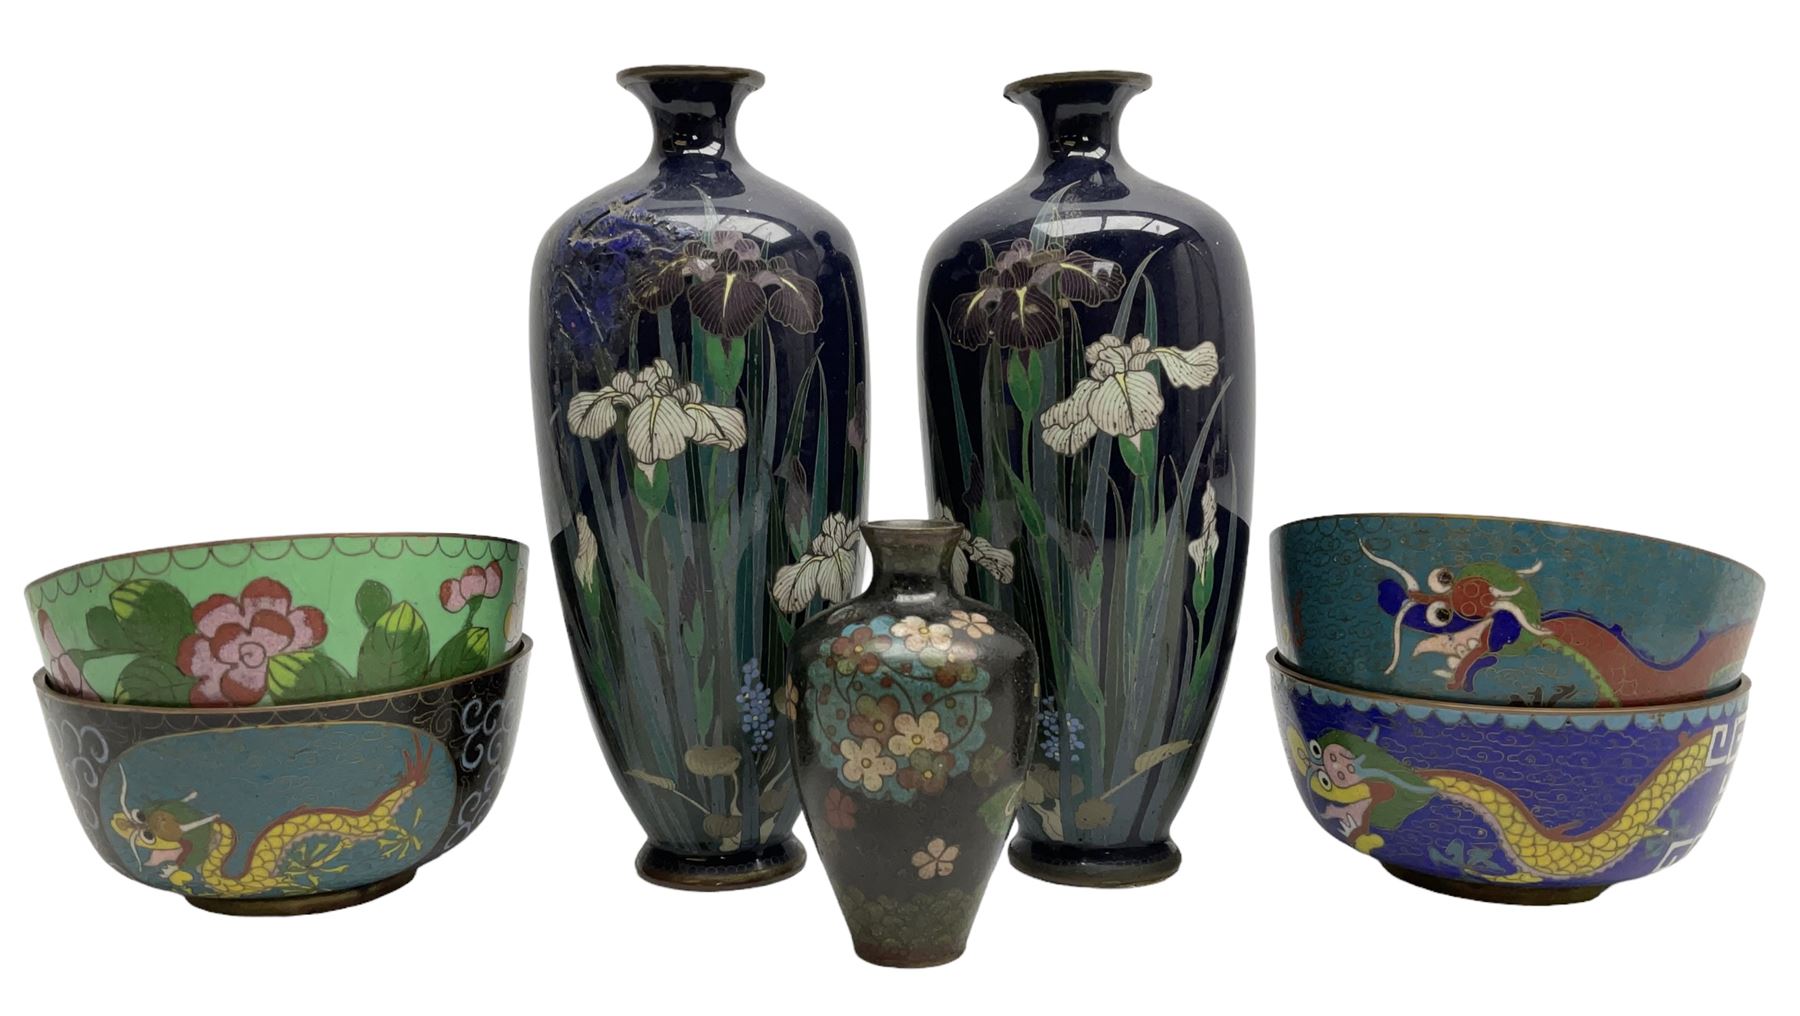 Pair of Japanese Meiji period cloisonn� vases of slender ovoid form decorated with iris flowers in p